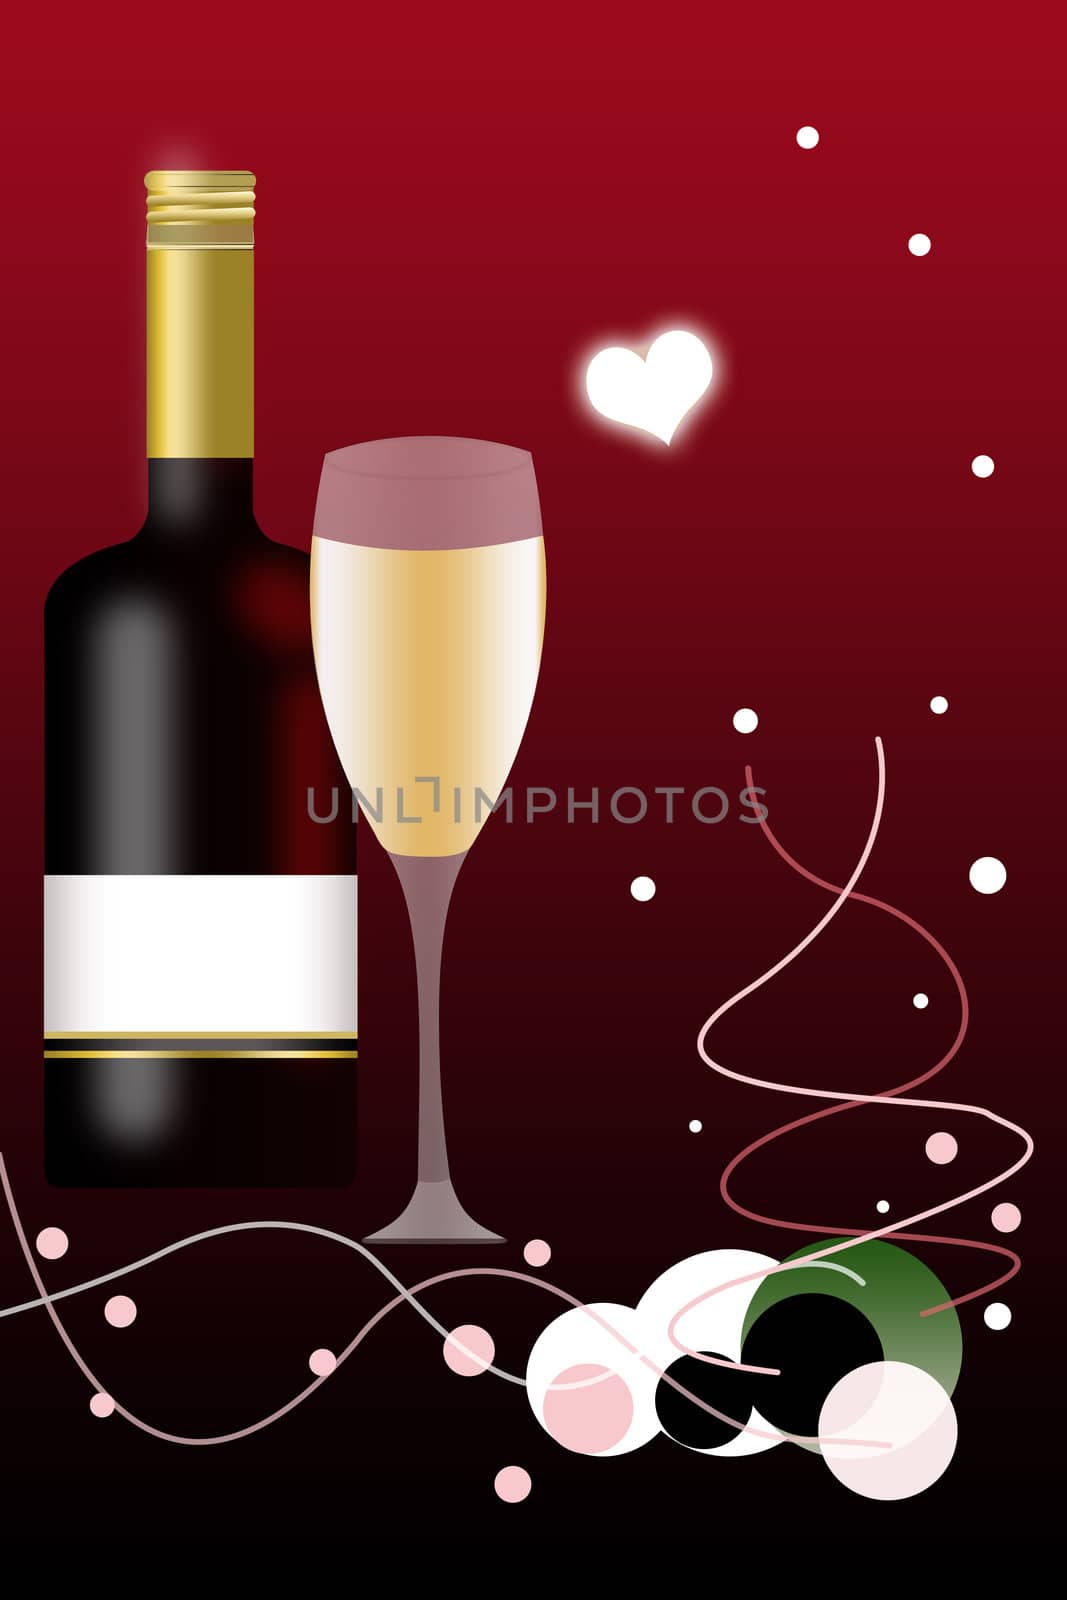 Valentines Day Background and Wine Bottle with Blank Label by mwp1969